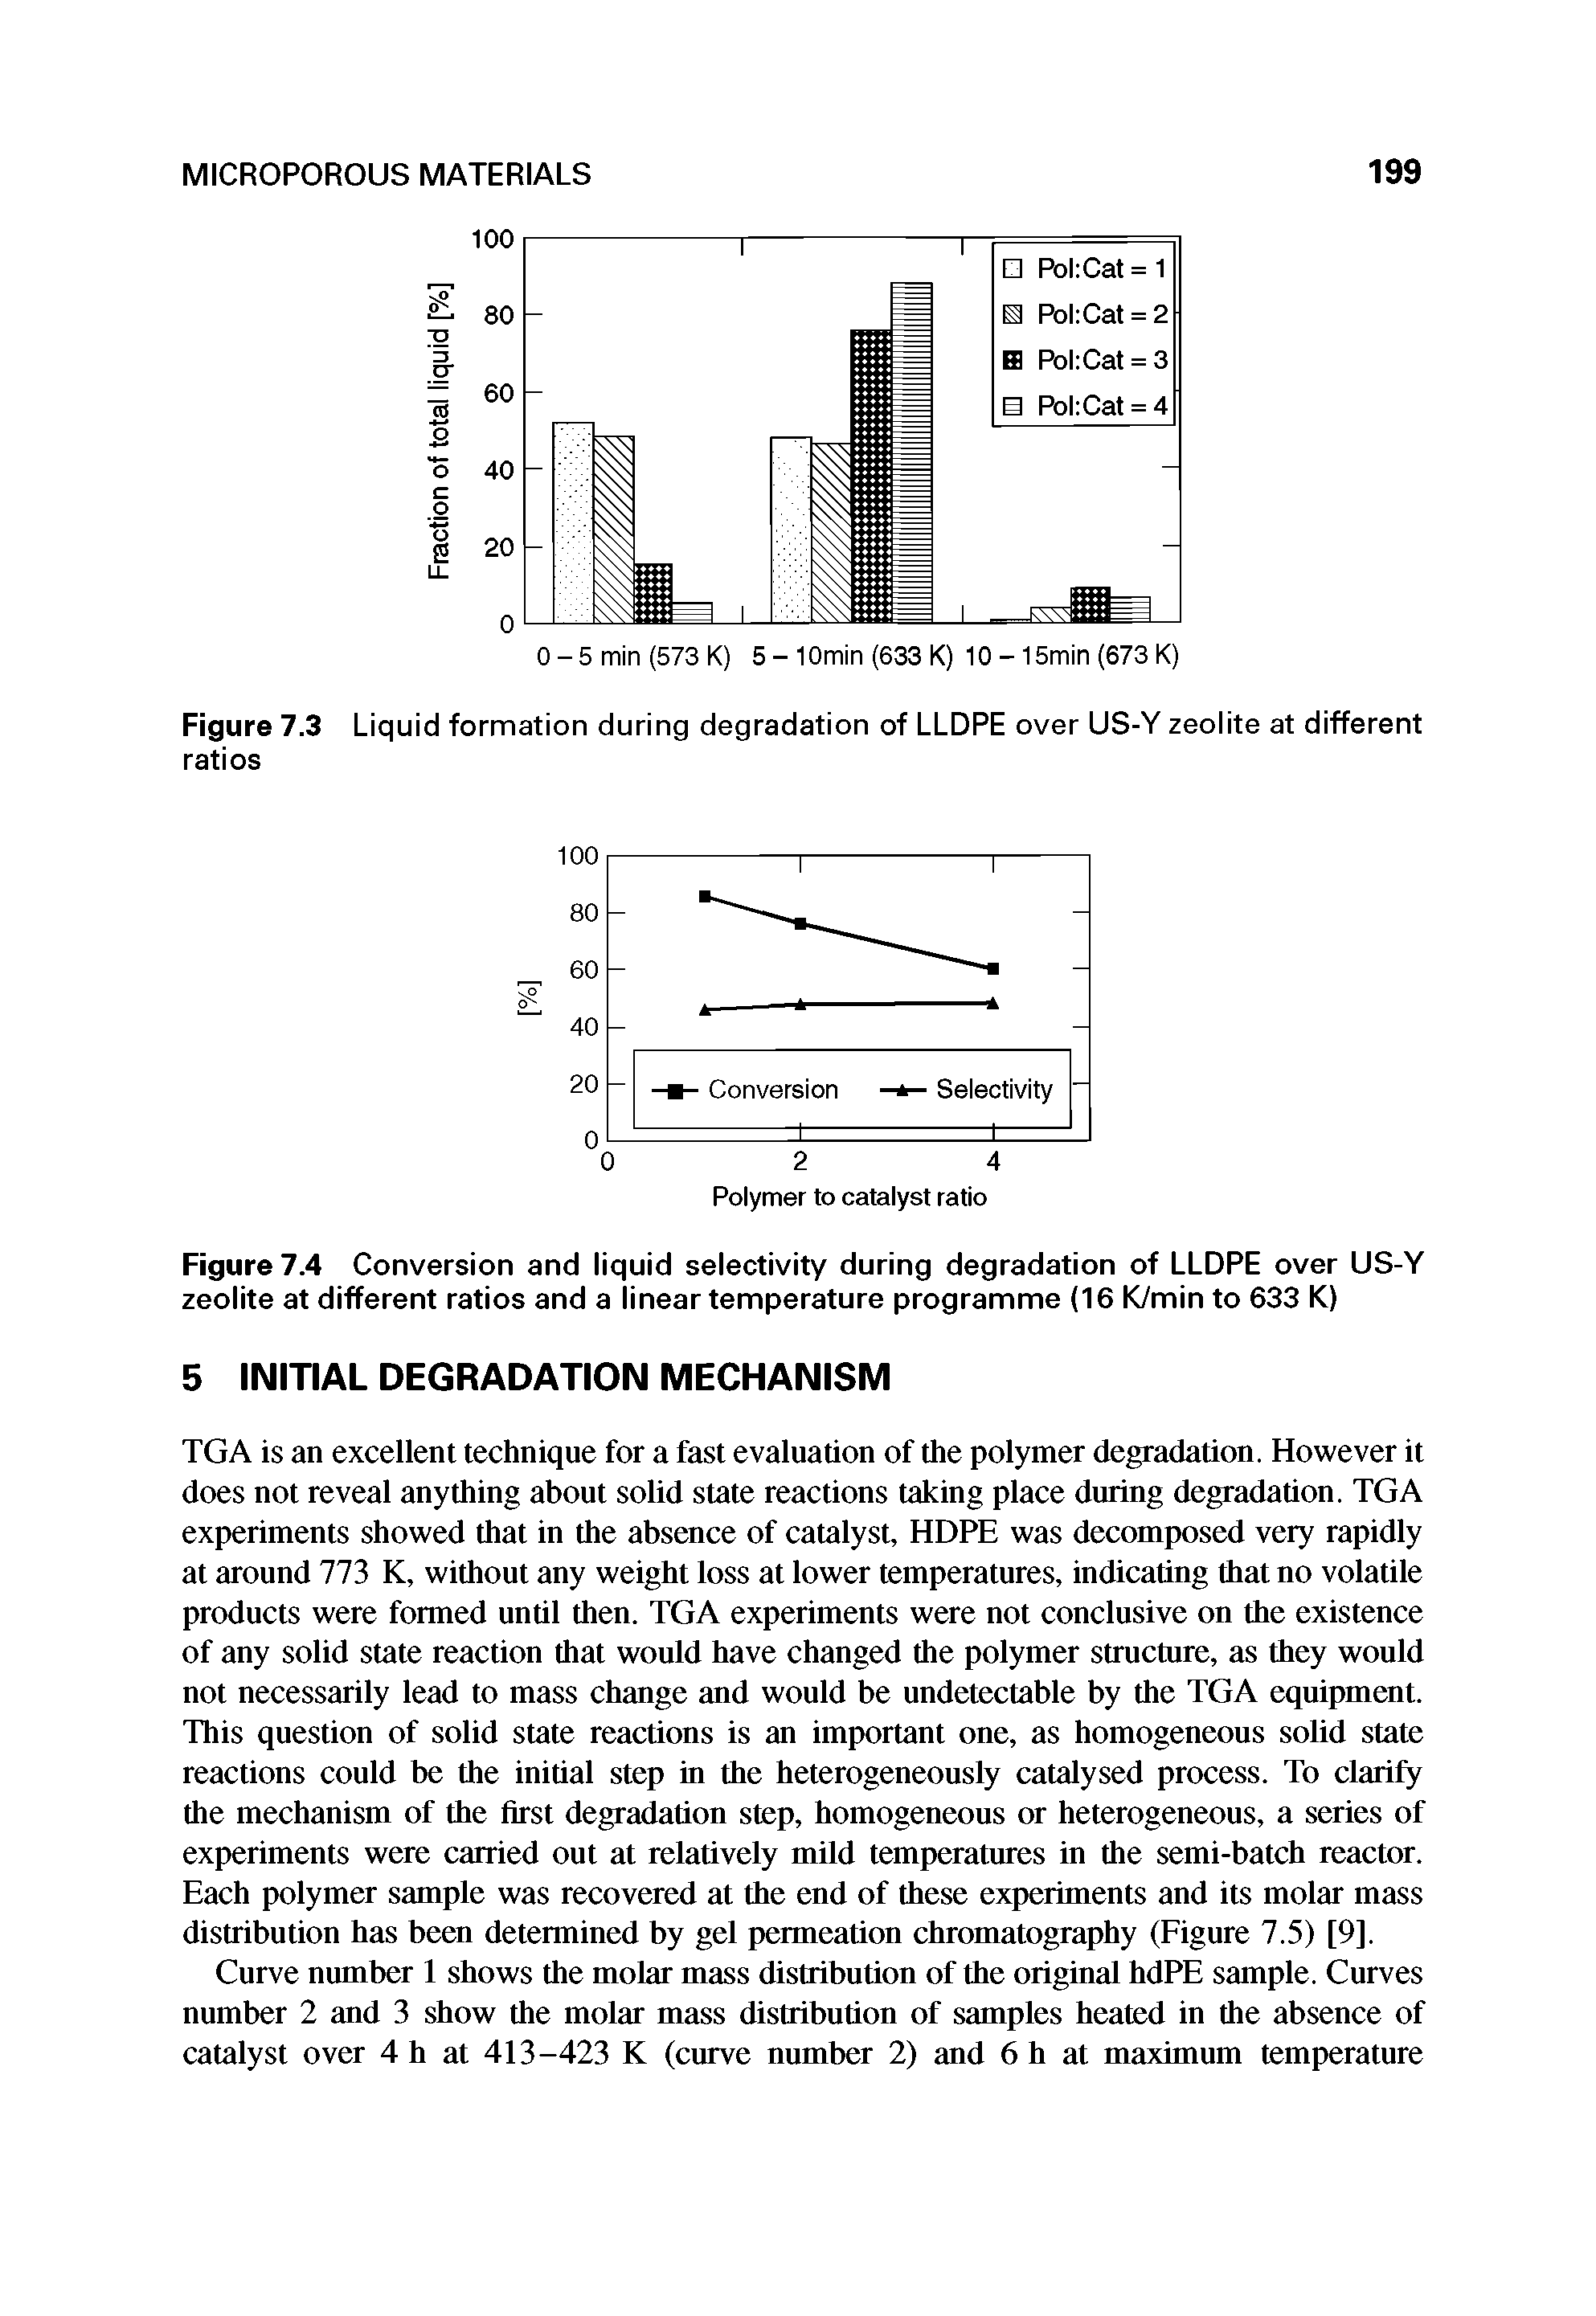 Figure 7.3 Liquid formation during degradation of LLDPE over US-Y zeolite at different ratios...